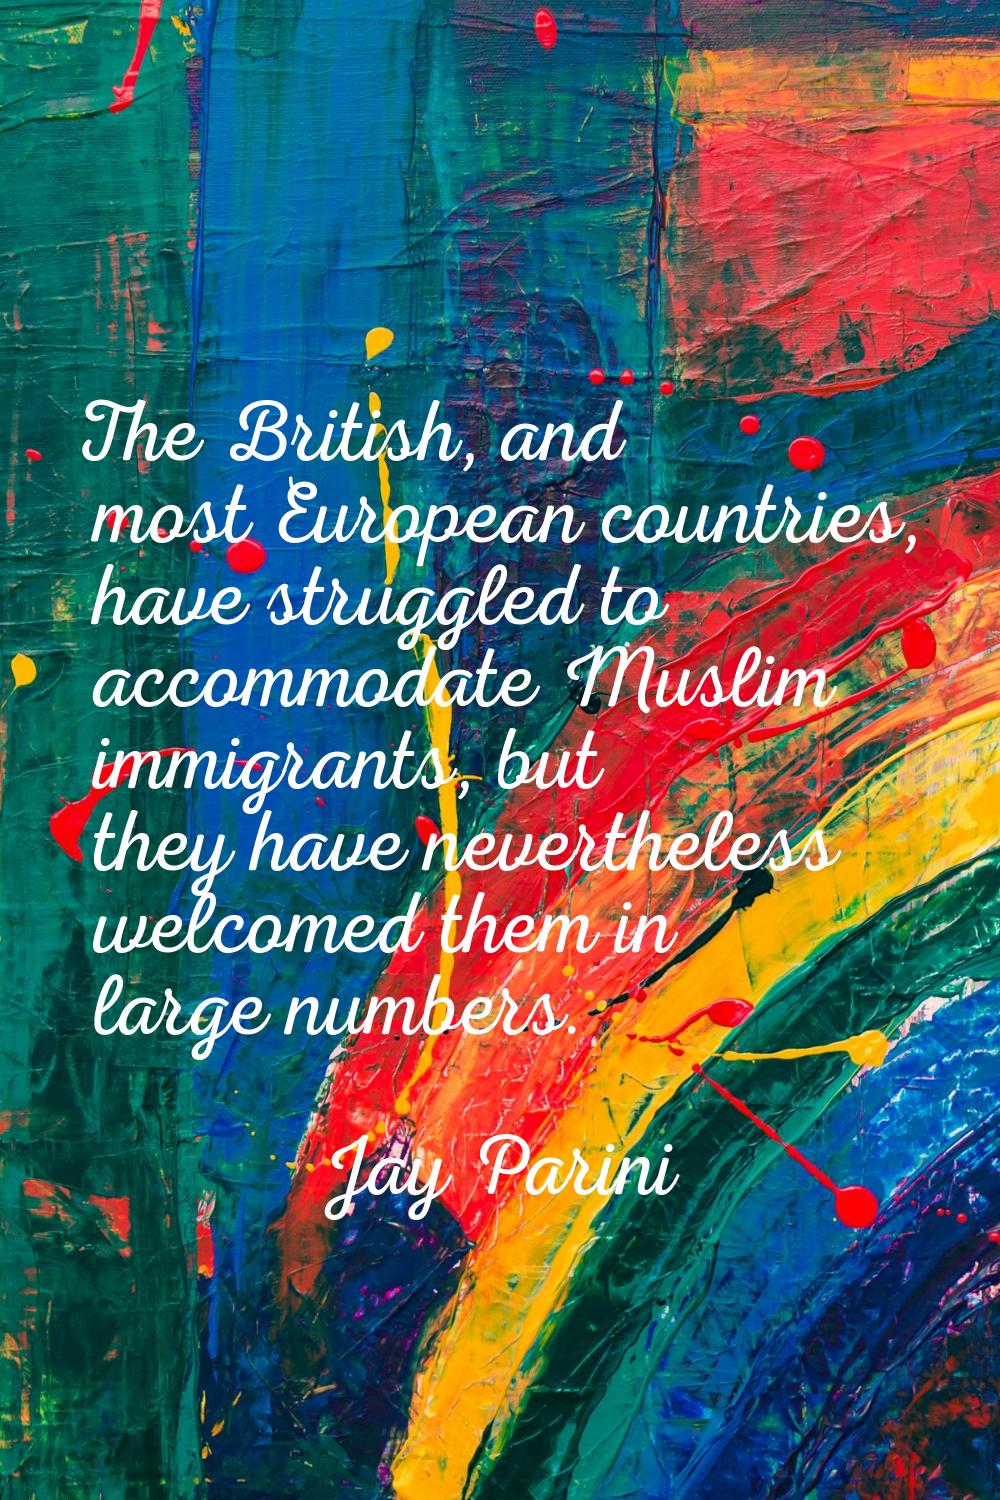 The British, and most European countries, have struggled to accommodate Muslim immigrants, but they